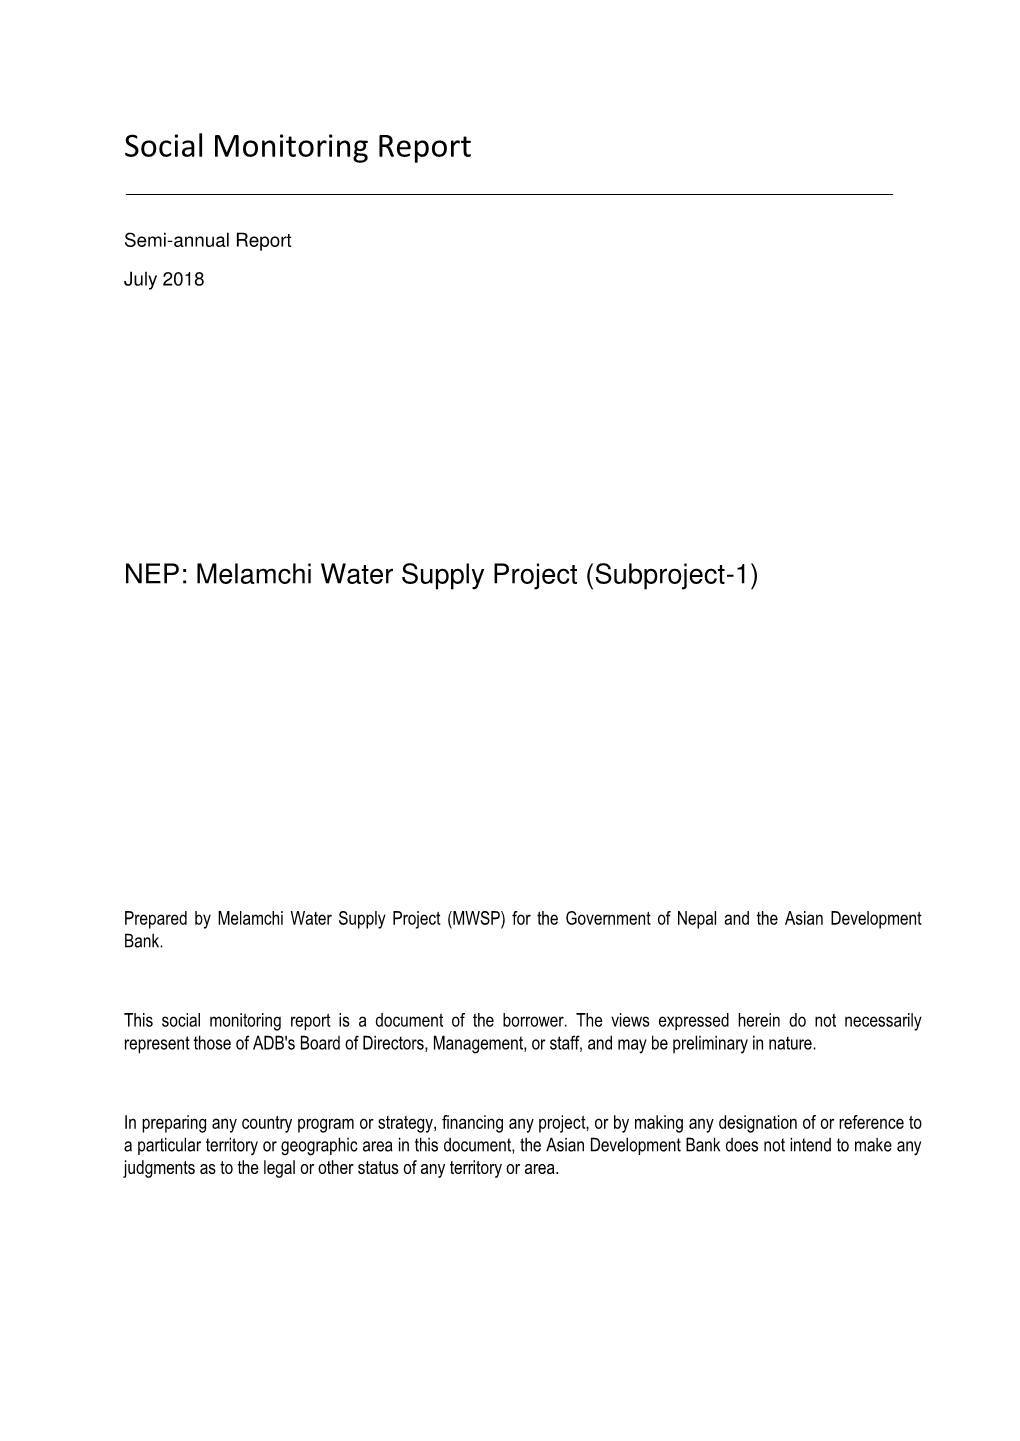 Melamchi Water Supply Project (Subproject-1)